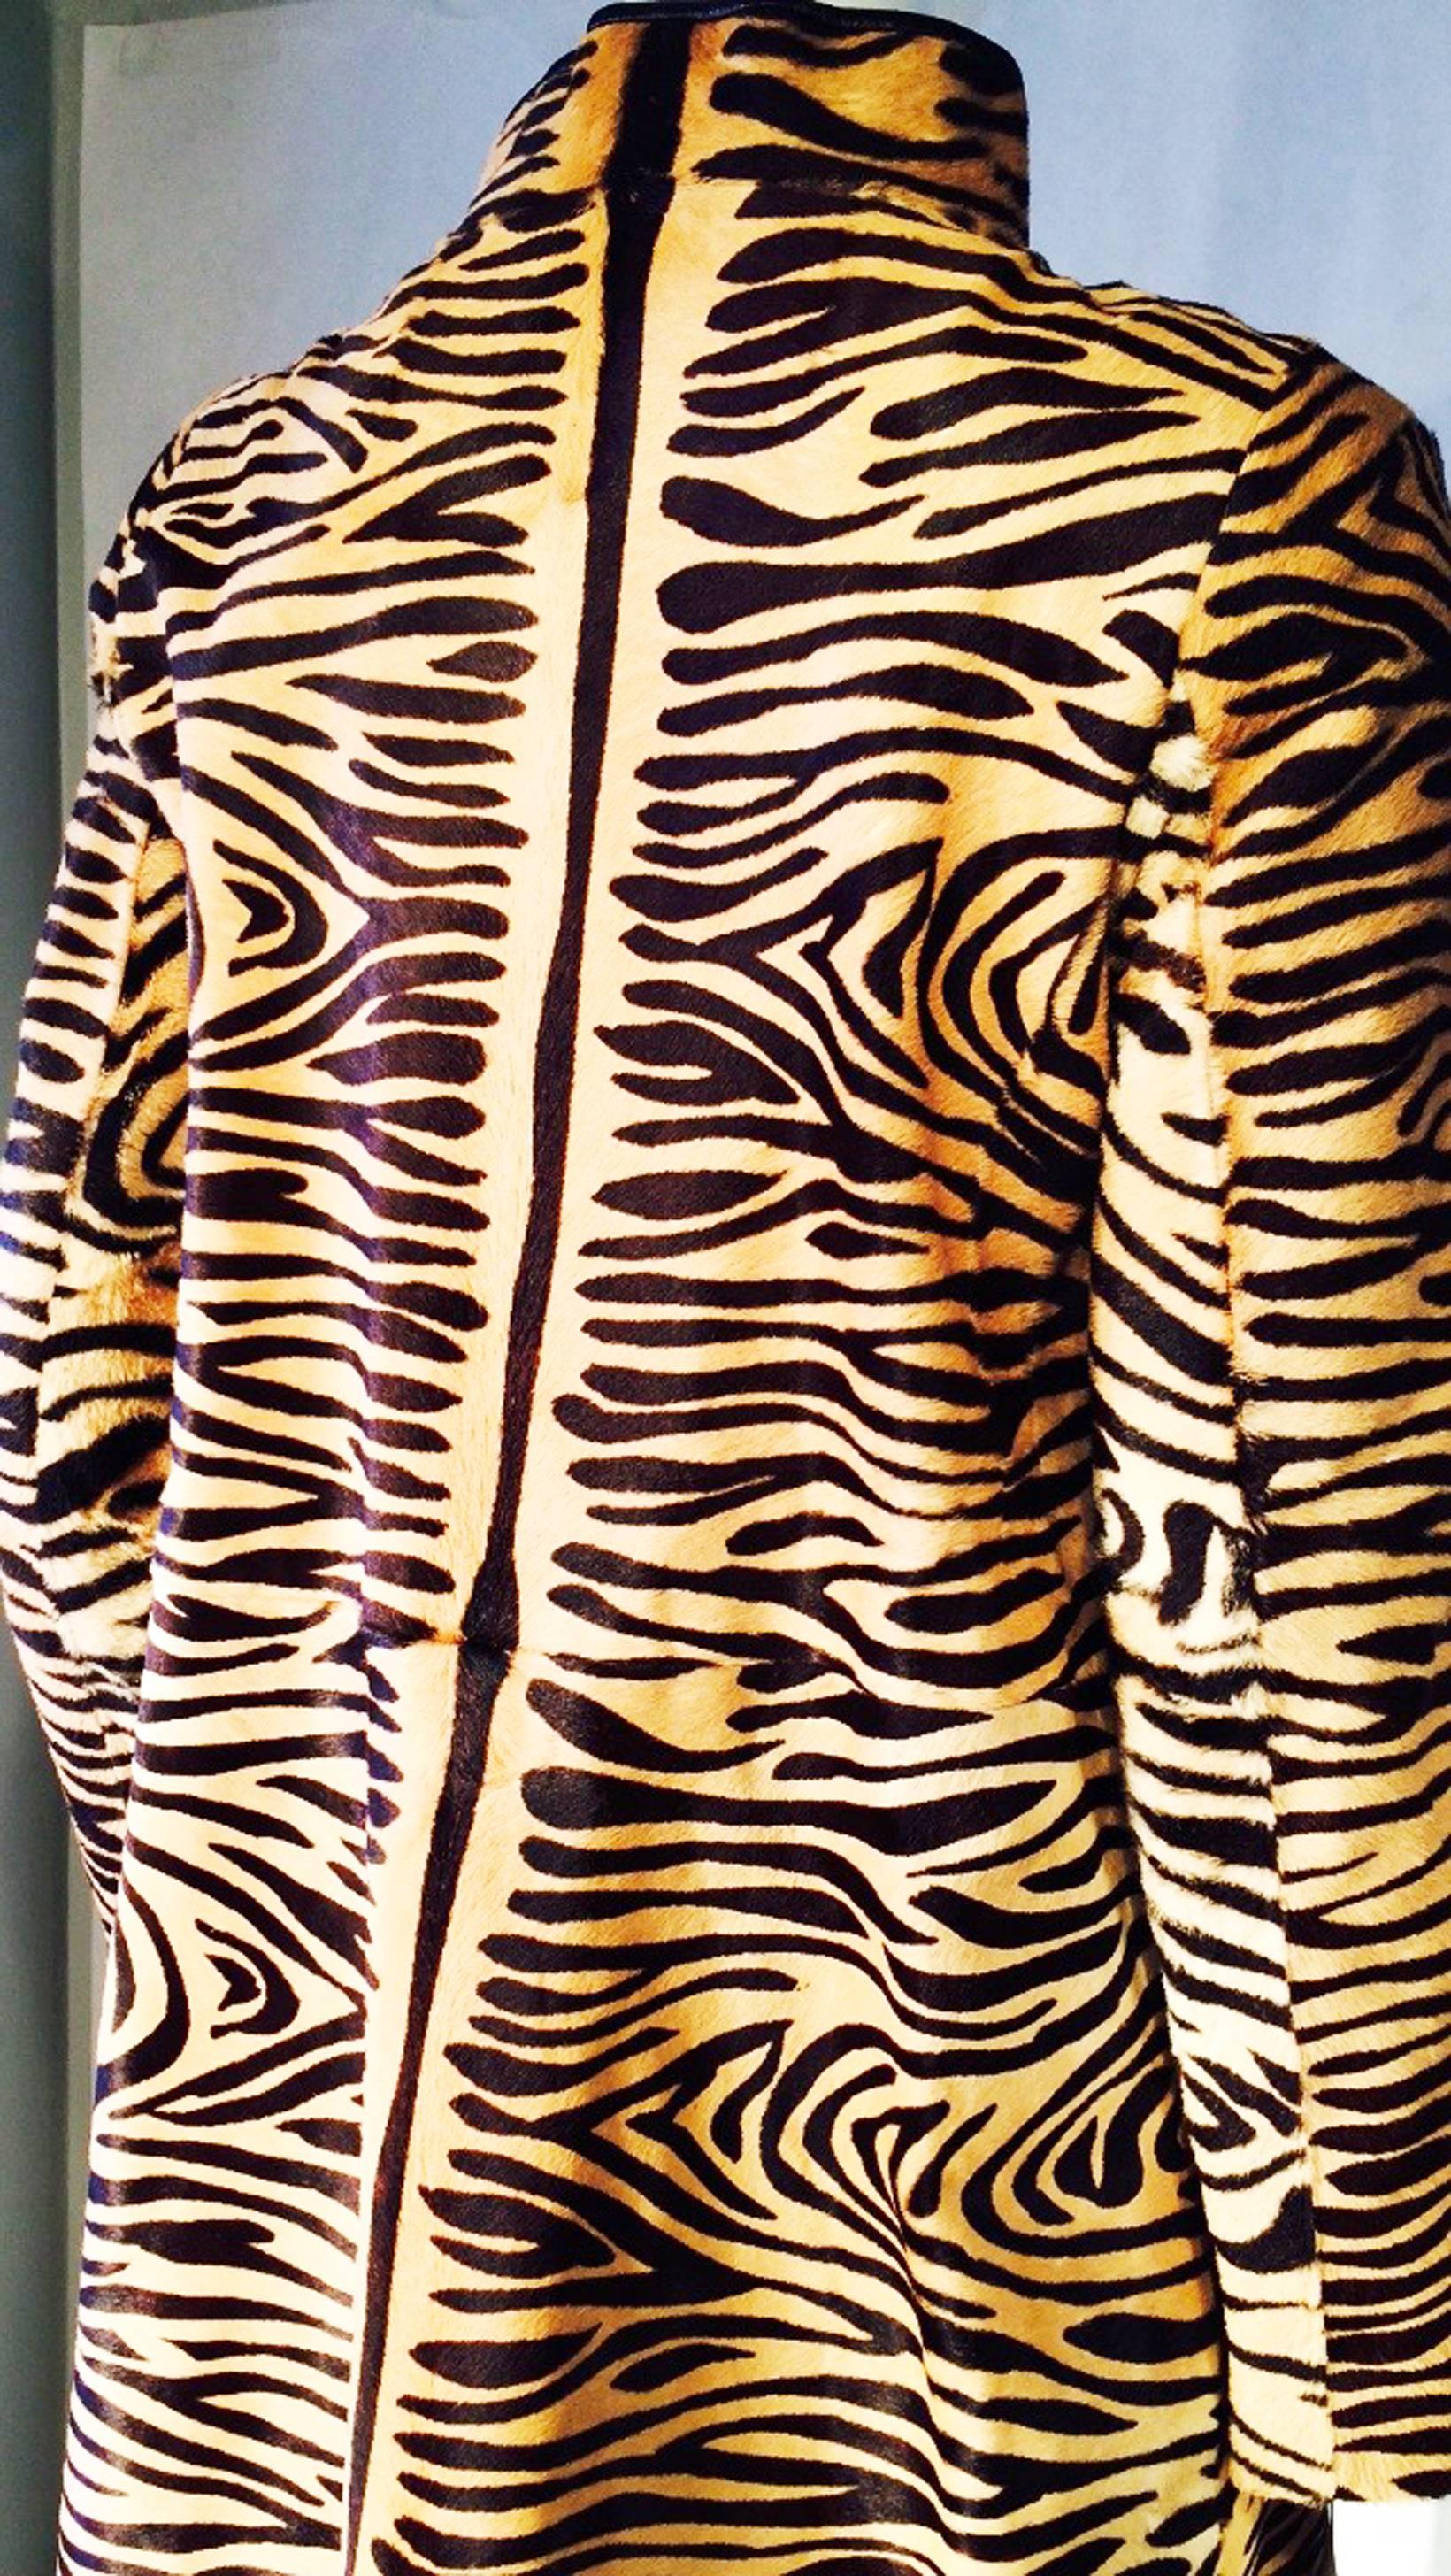 Rare Christian Dior Couture Tiger Stencil Pony Hair Coat 1950s In Excellent Condition For Sale In Phoenix, AZ